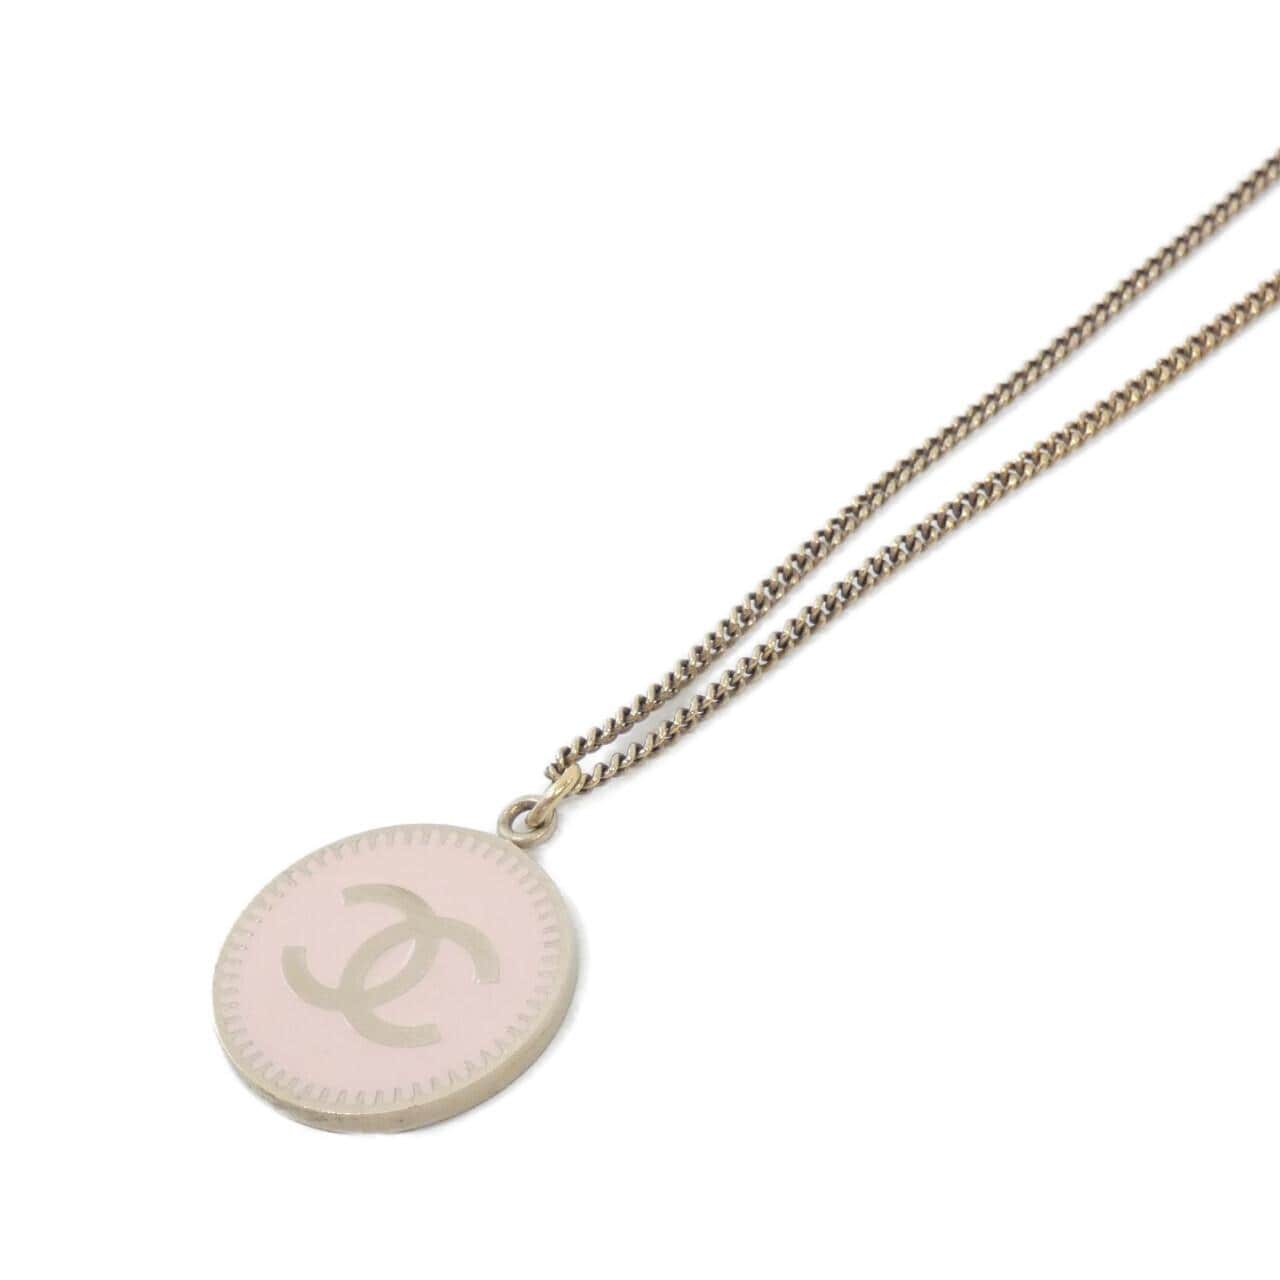 CHANEL 31417 Necklace